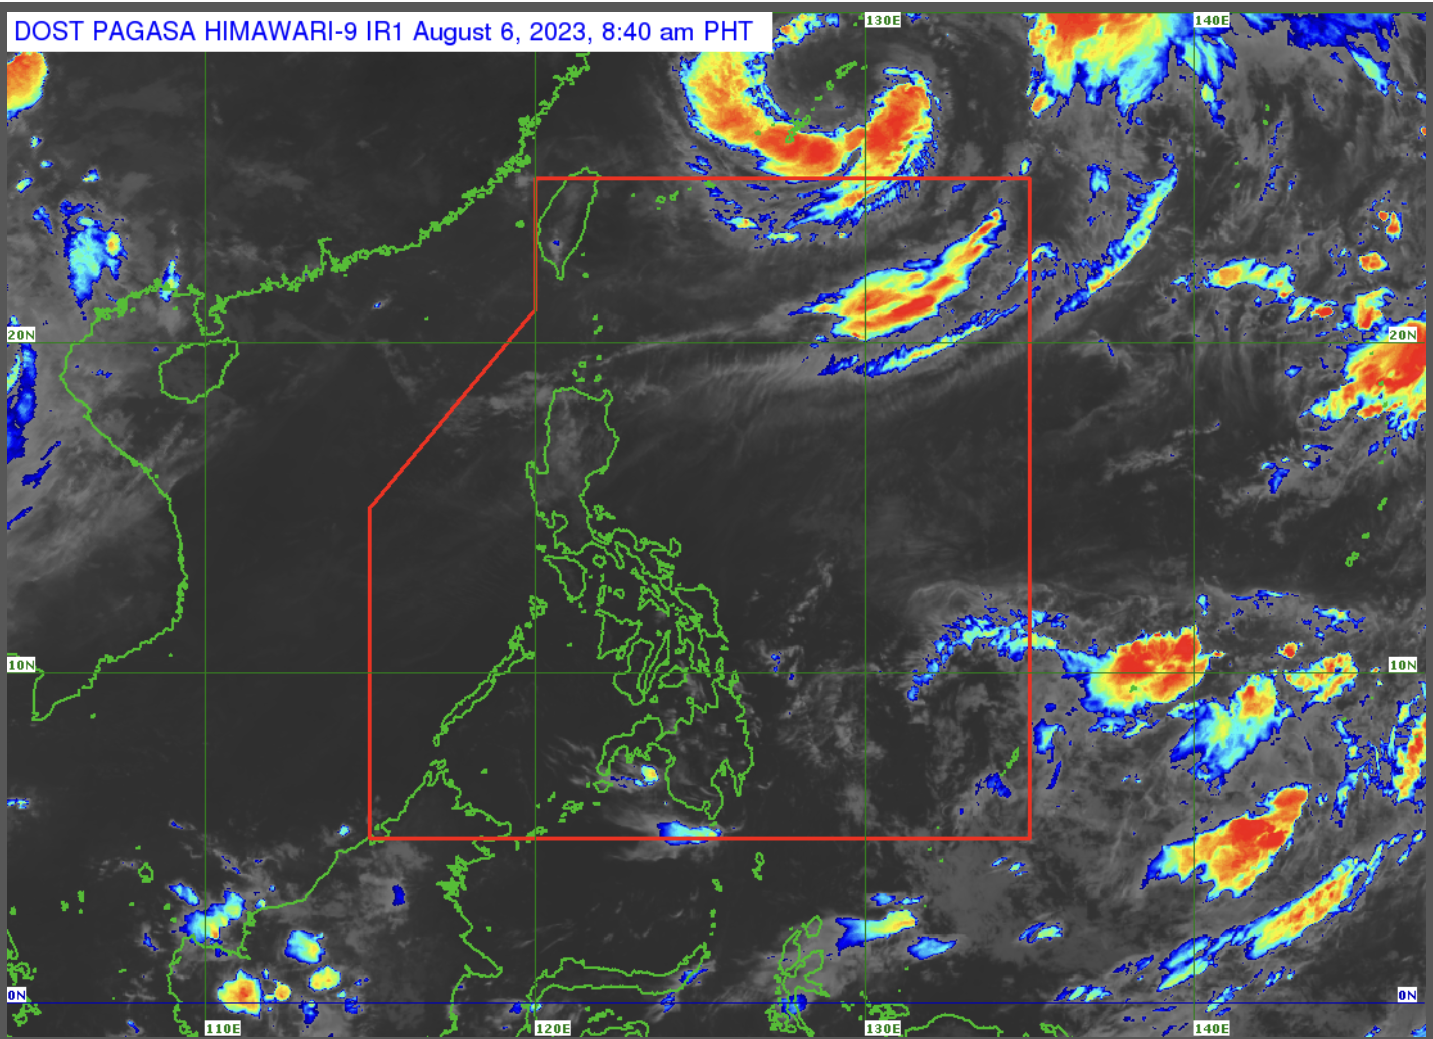 The southwest monsoon or "habagat" will continue to bring cloudy skies and rain showers to parts of Northern Luzon, while the rest of the country will experience fair weather, the state weather bureau said on Sunday. 